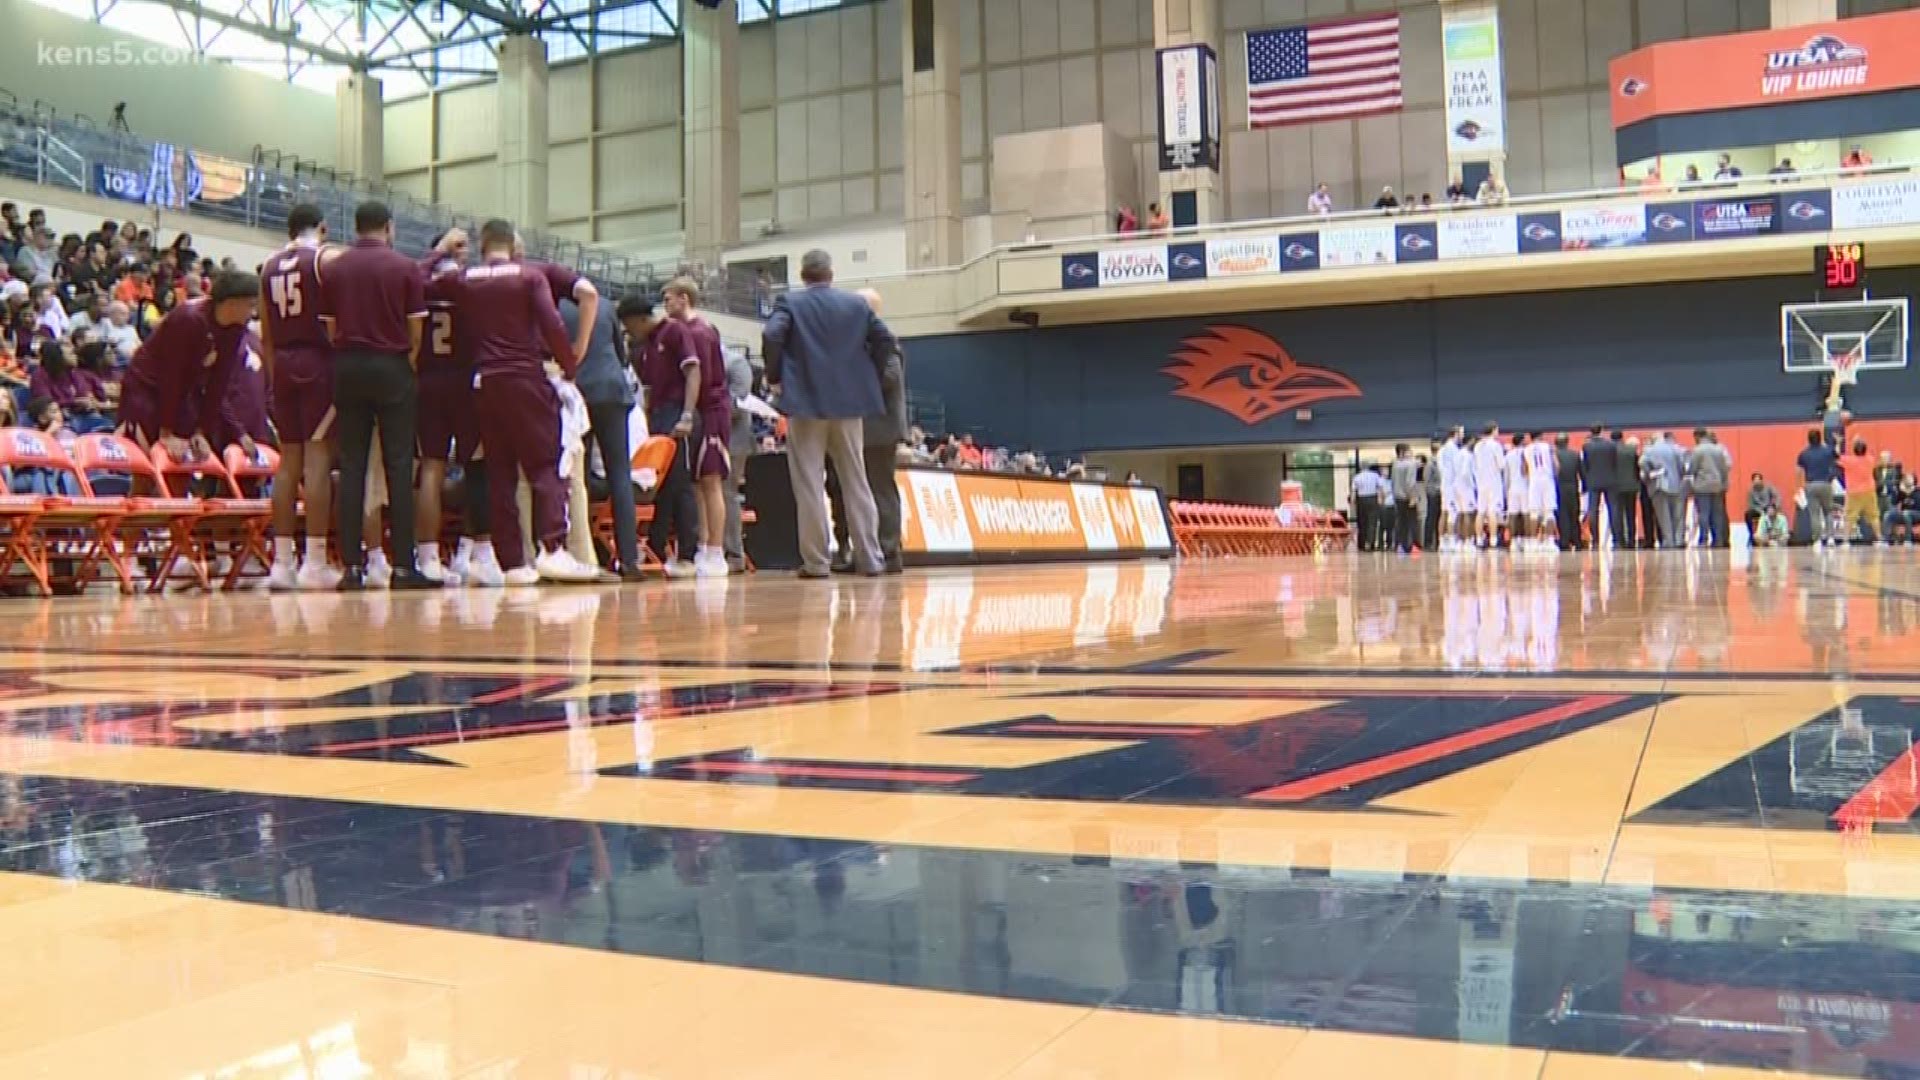 Texas State won a close one, 69-68. The Bobcats are now 7-1 on the season while UTSA is 2-6.